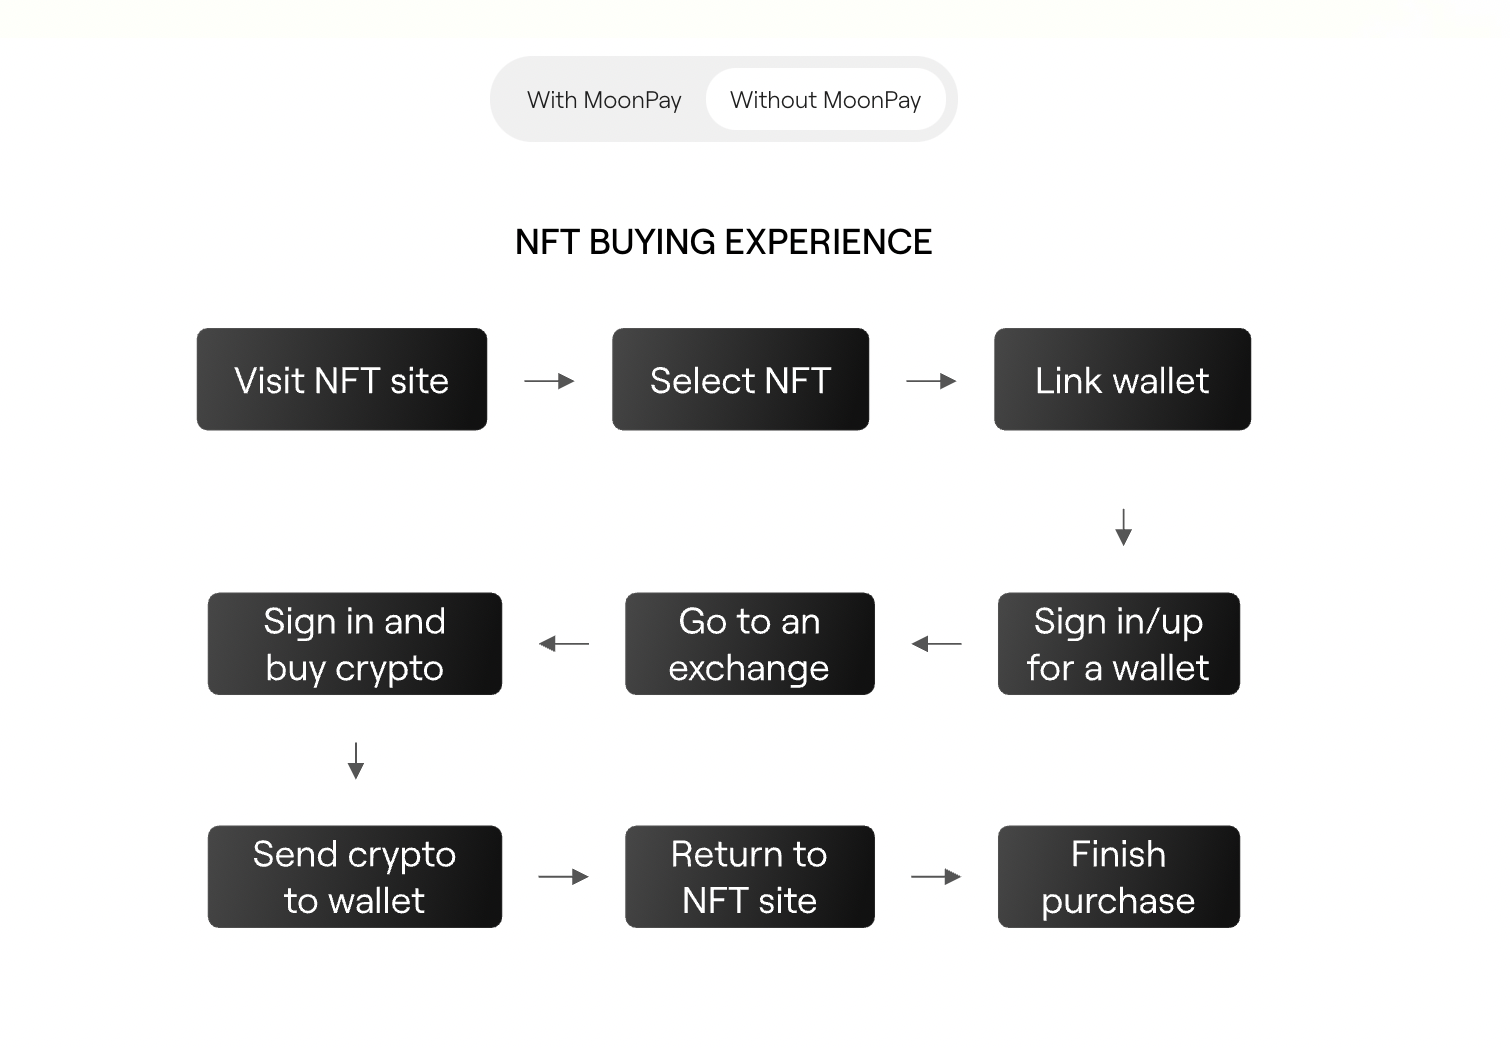 A graphic showing the typical NFT buying process.